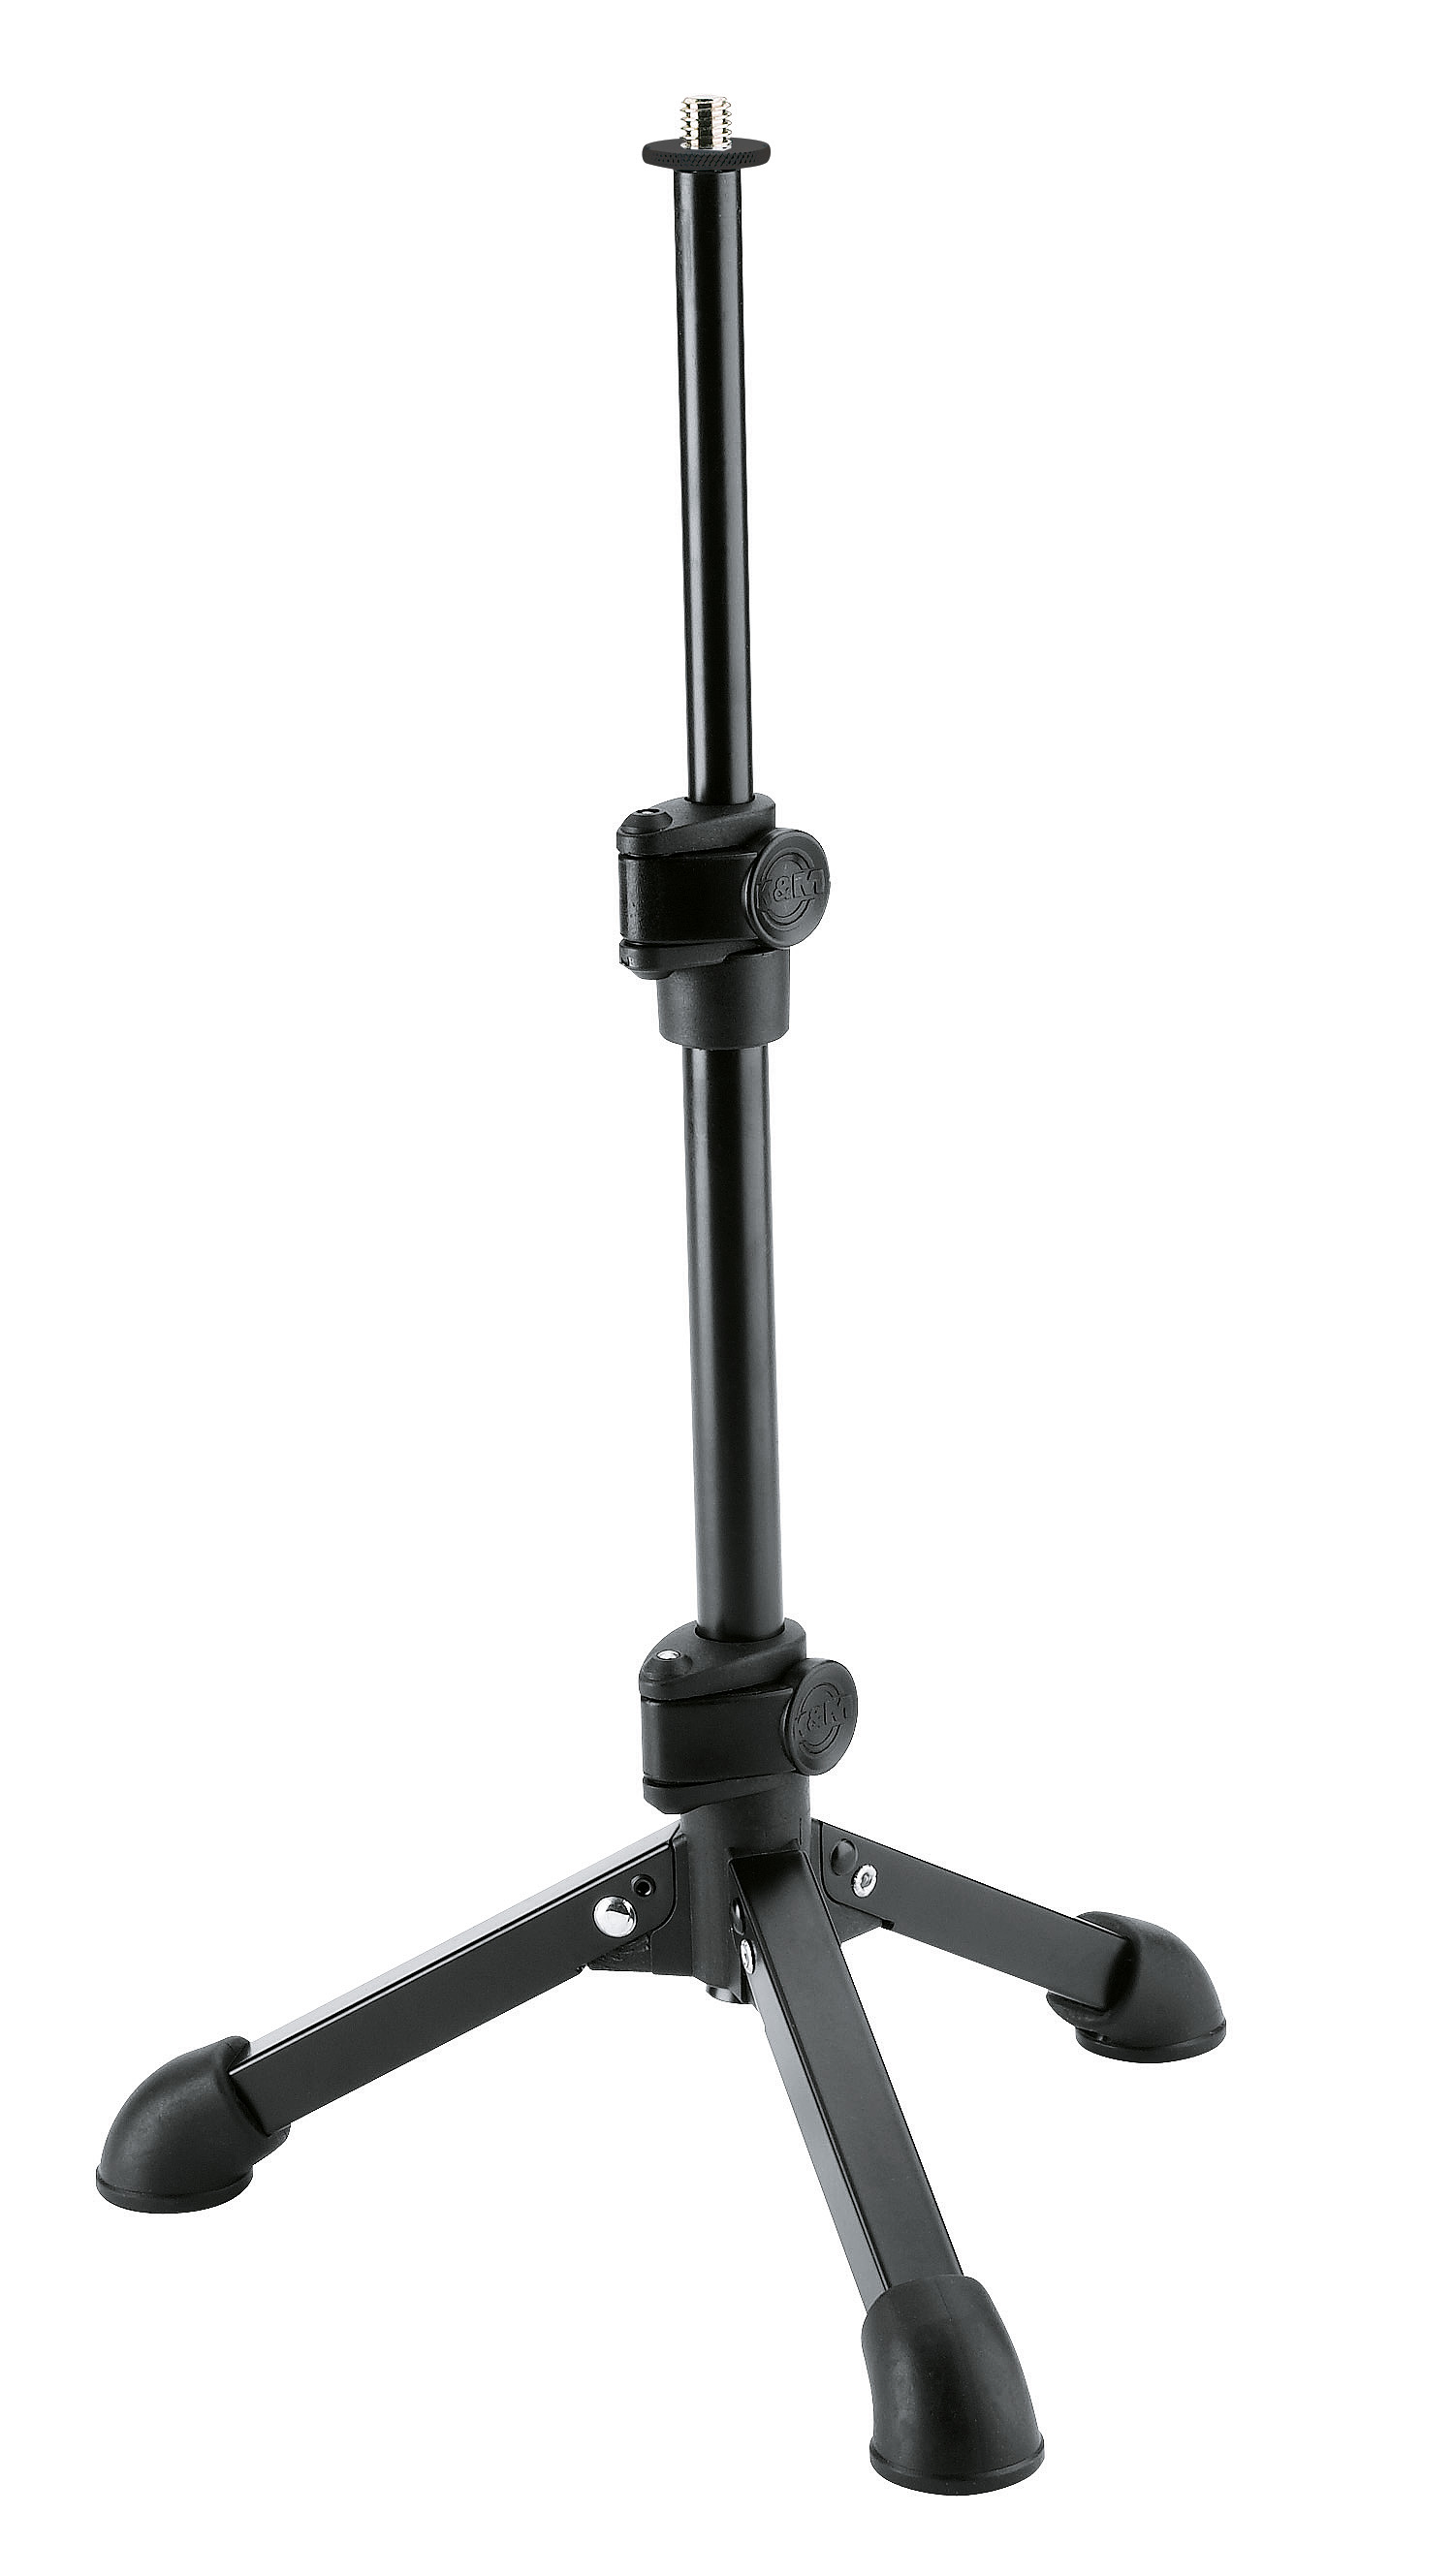 23250 pied microphone de table Microphone stand K&m